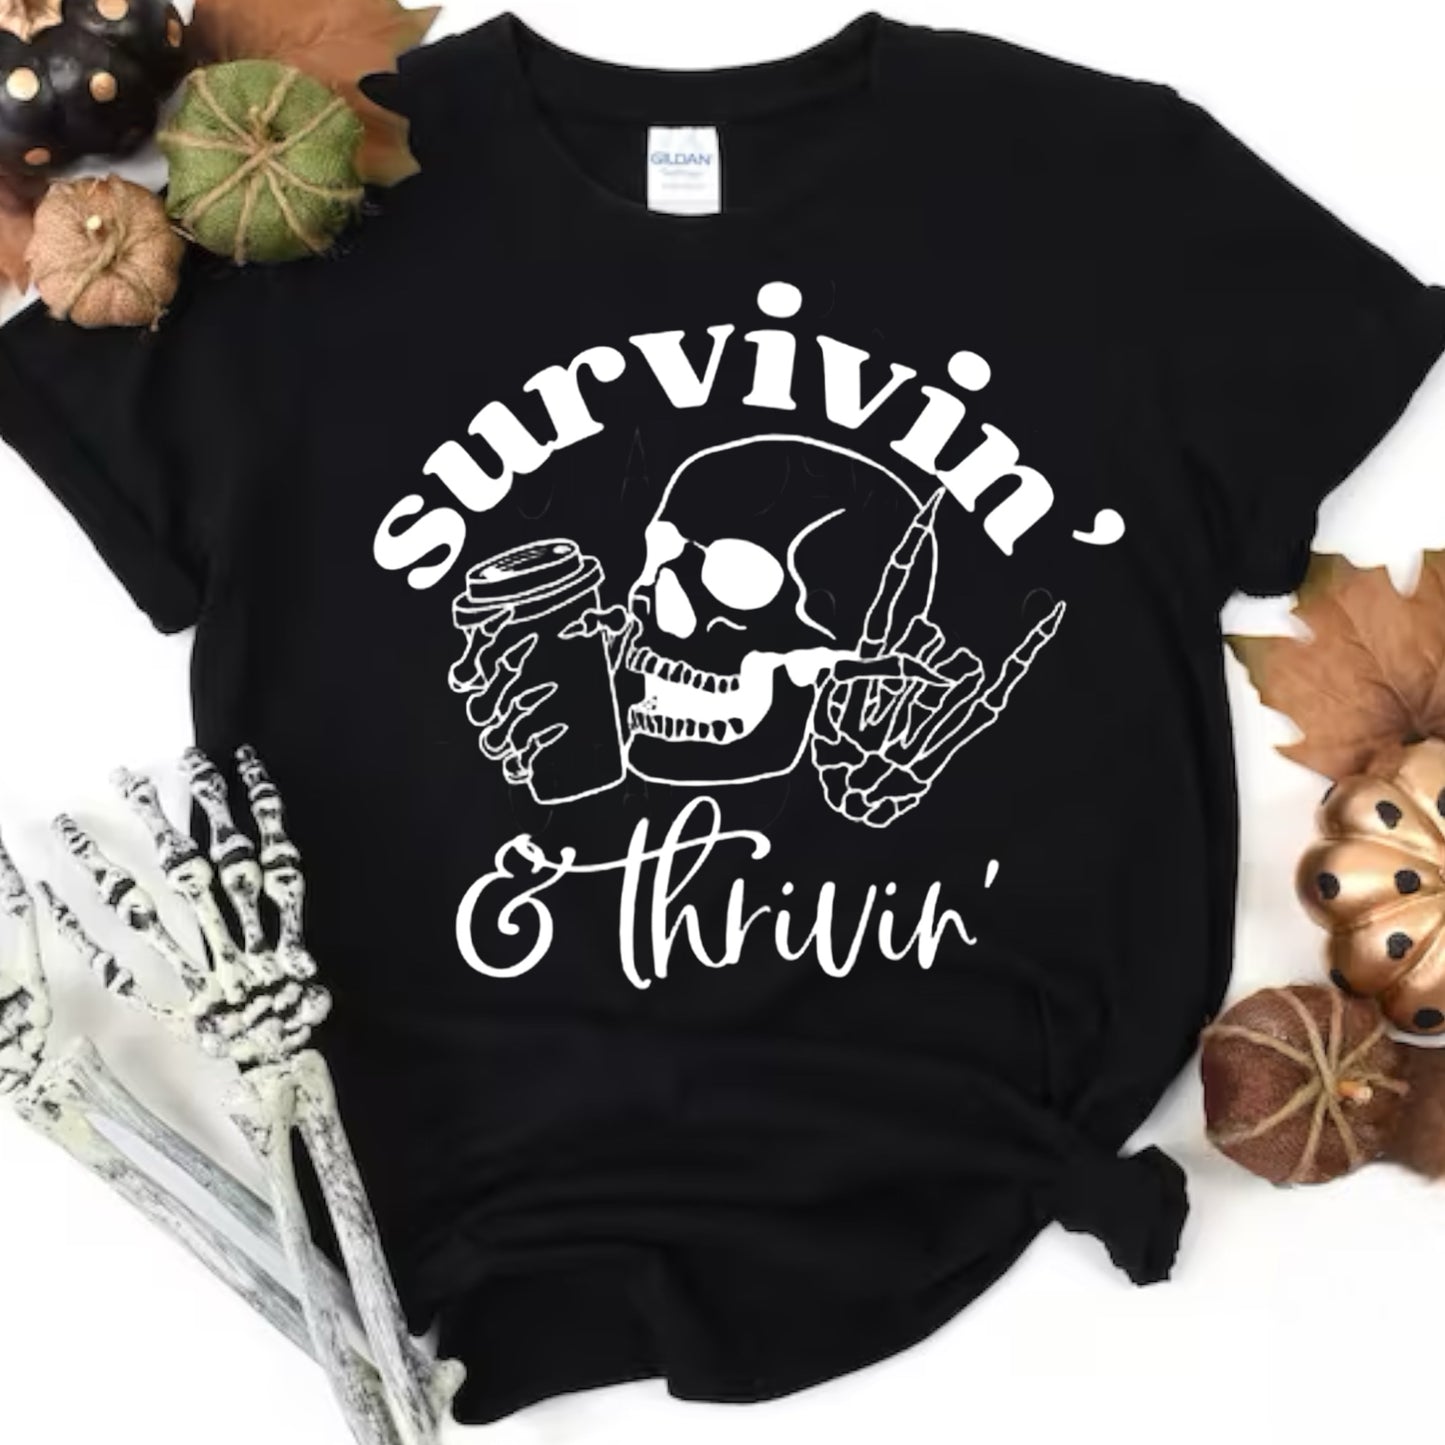 Surviving’ and Thrivin’ Tee